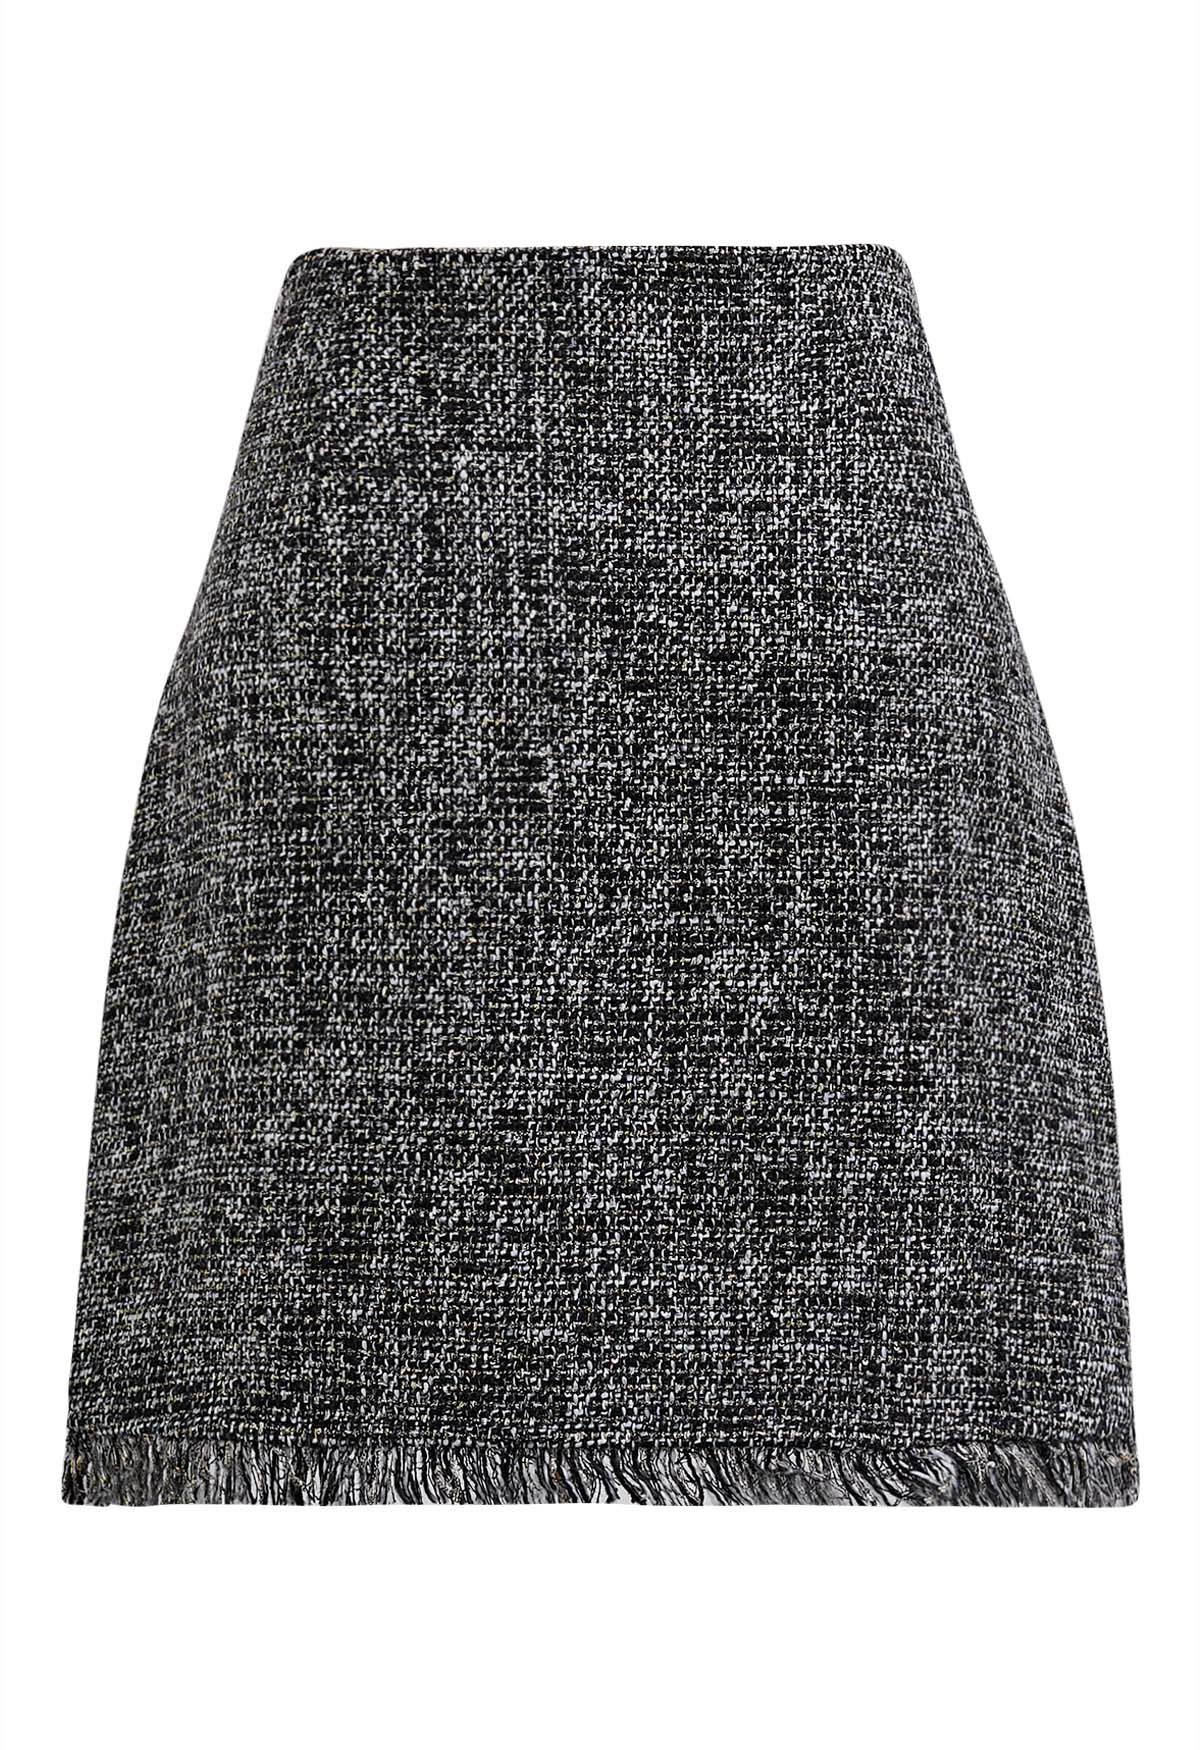 Buttoned Fringe Trimmed Tweed Mini Bud Skirt - Retro, Indie and Unique ...